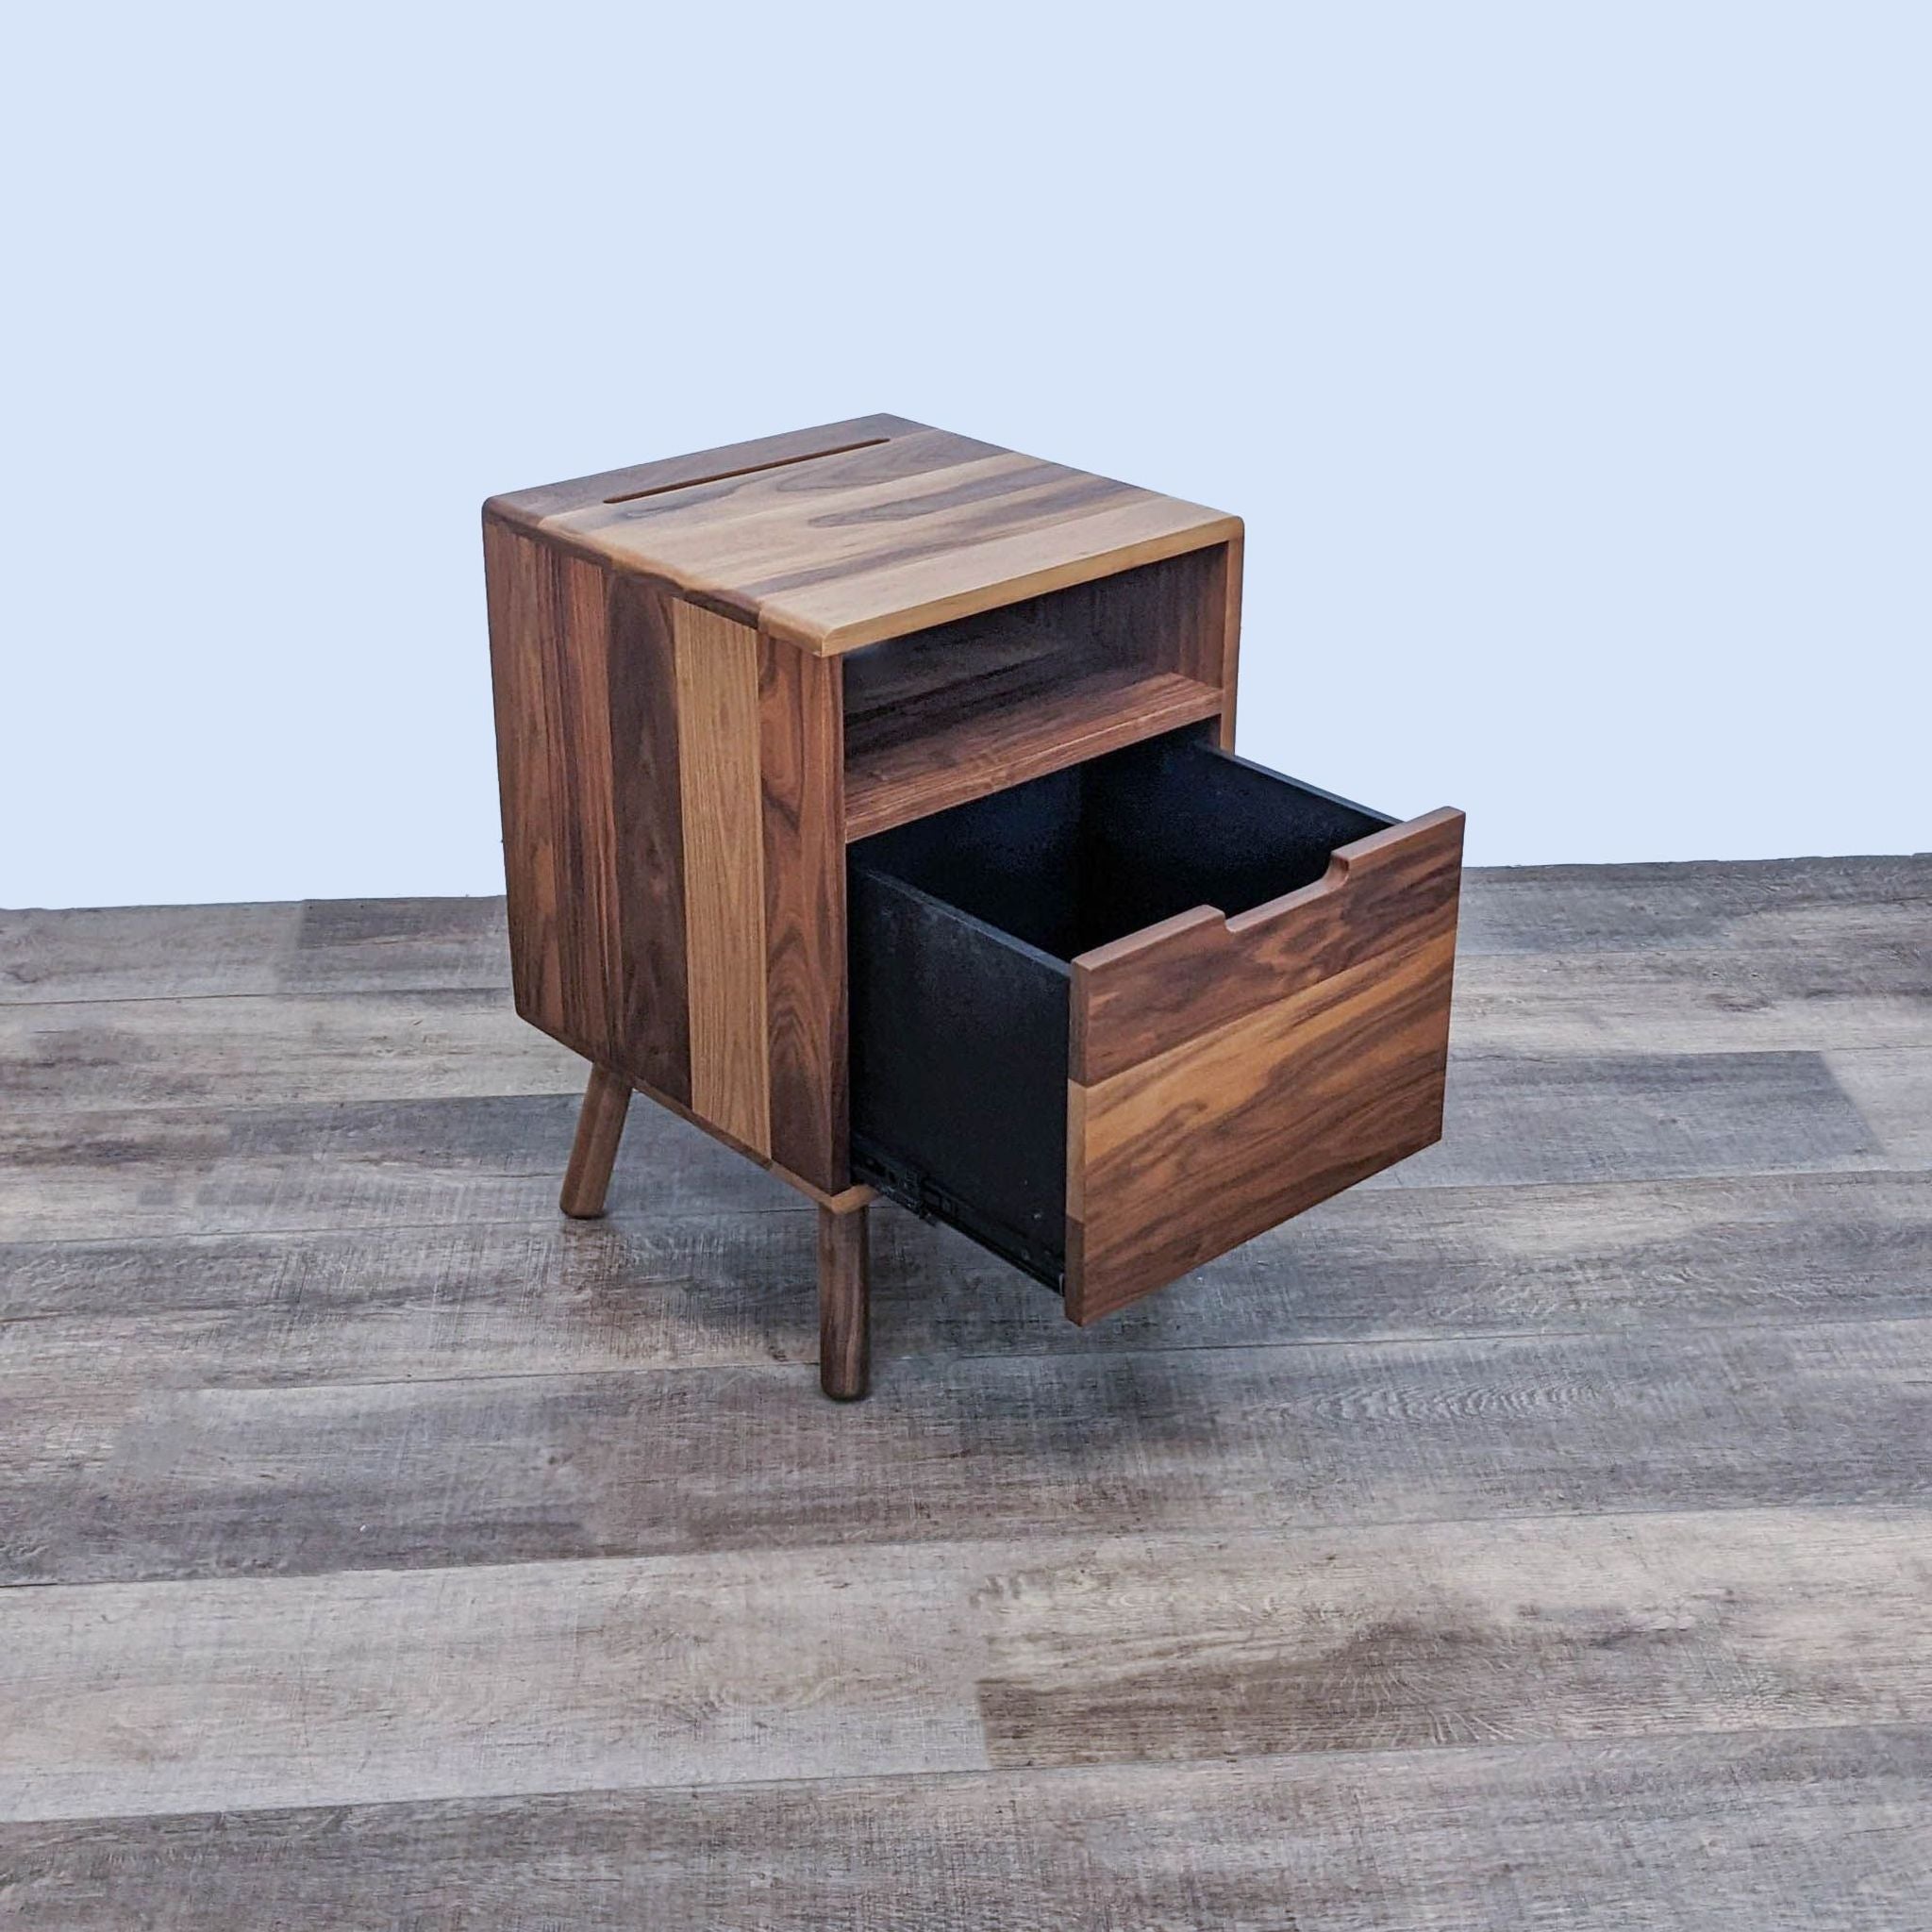 Mid-Century Modern style Reperch nightstand with open drawer showcasing interior and cable management areas.